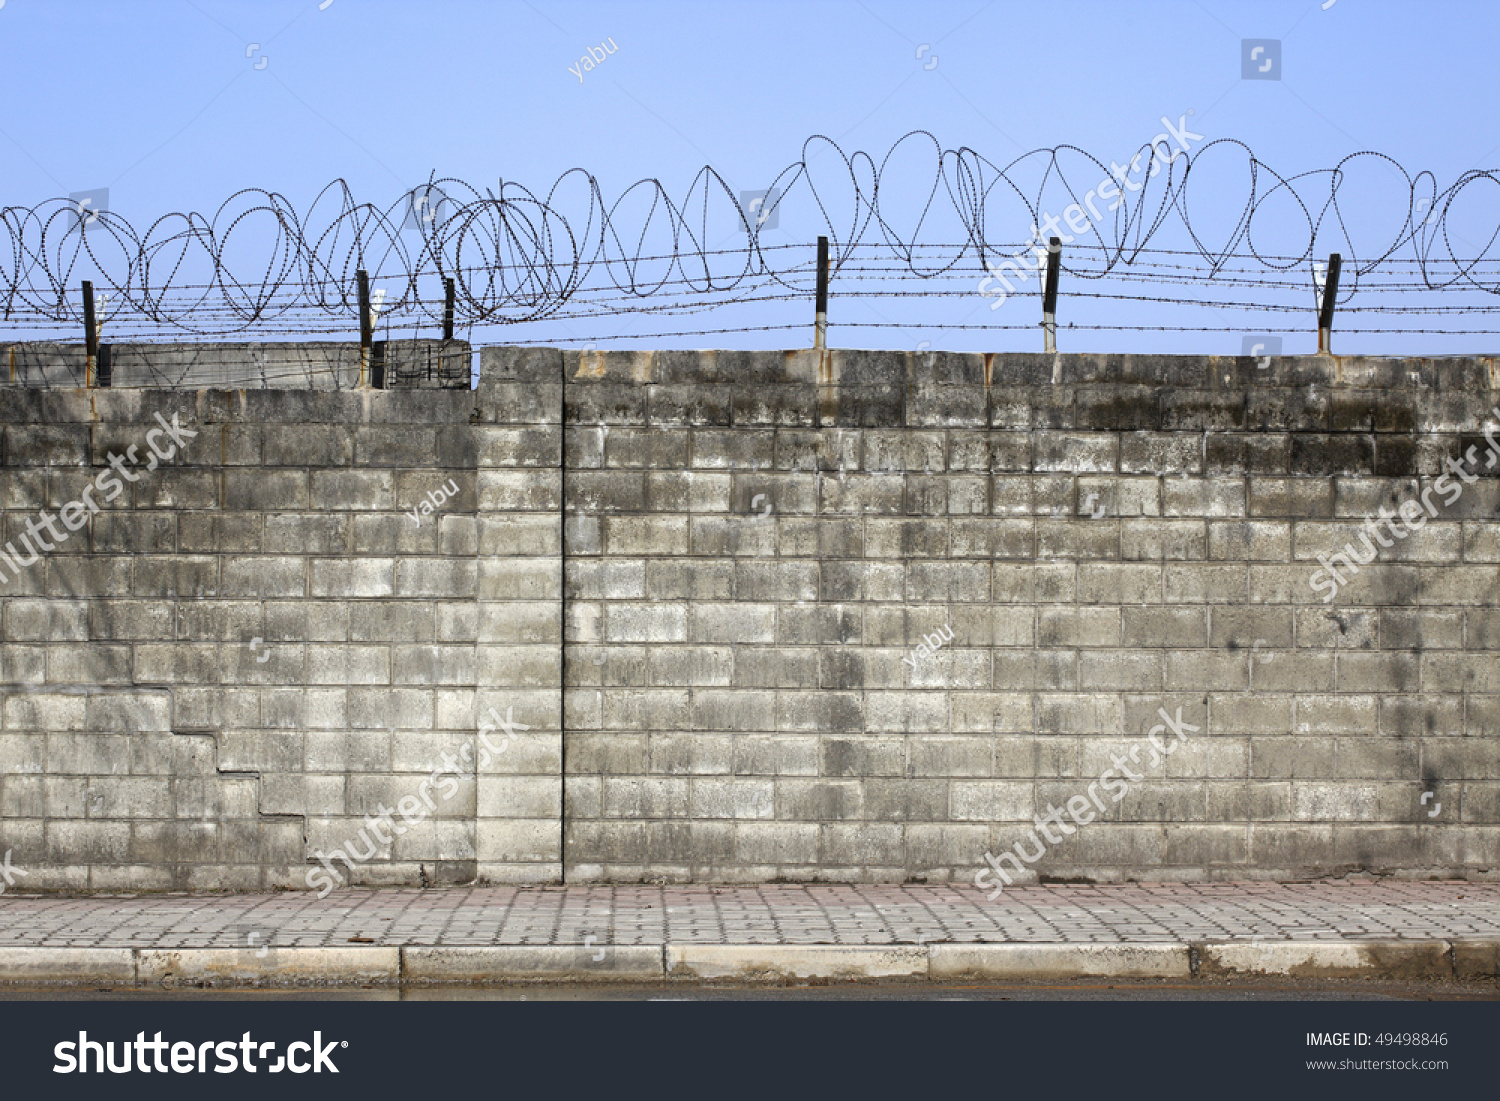 Brick Wall With Barbed Wire